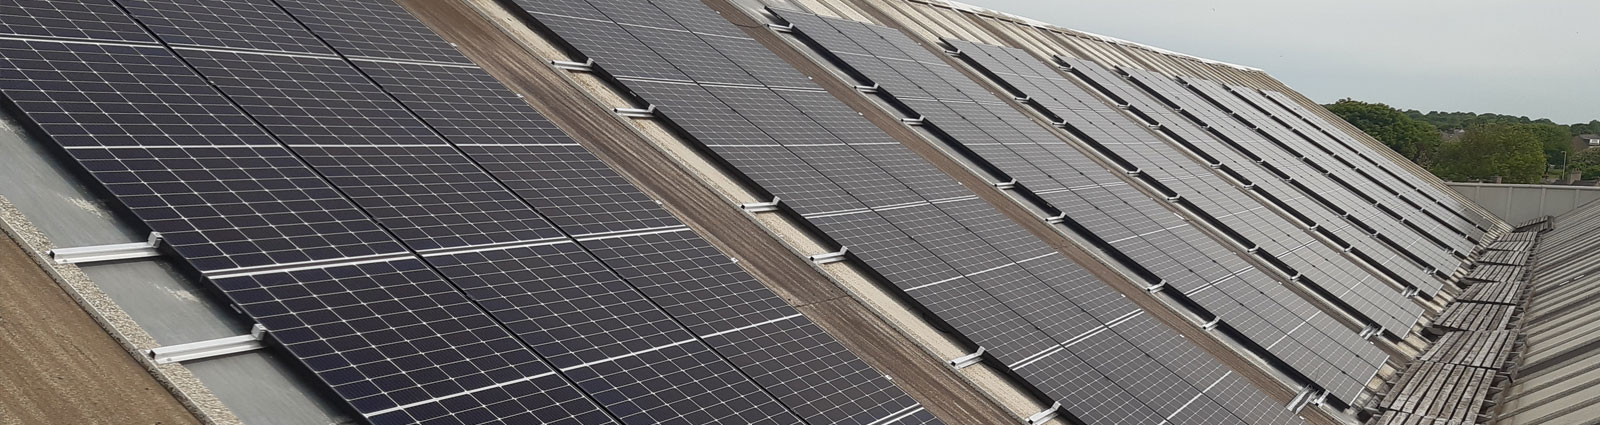 Flexiform Solar Panels and Environmental Projects